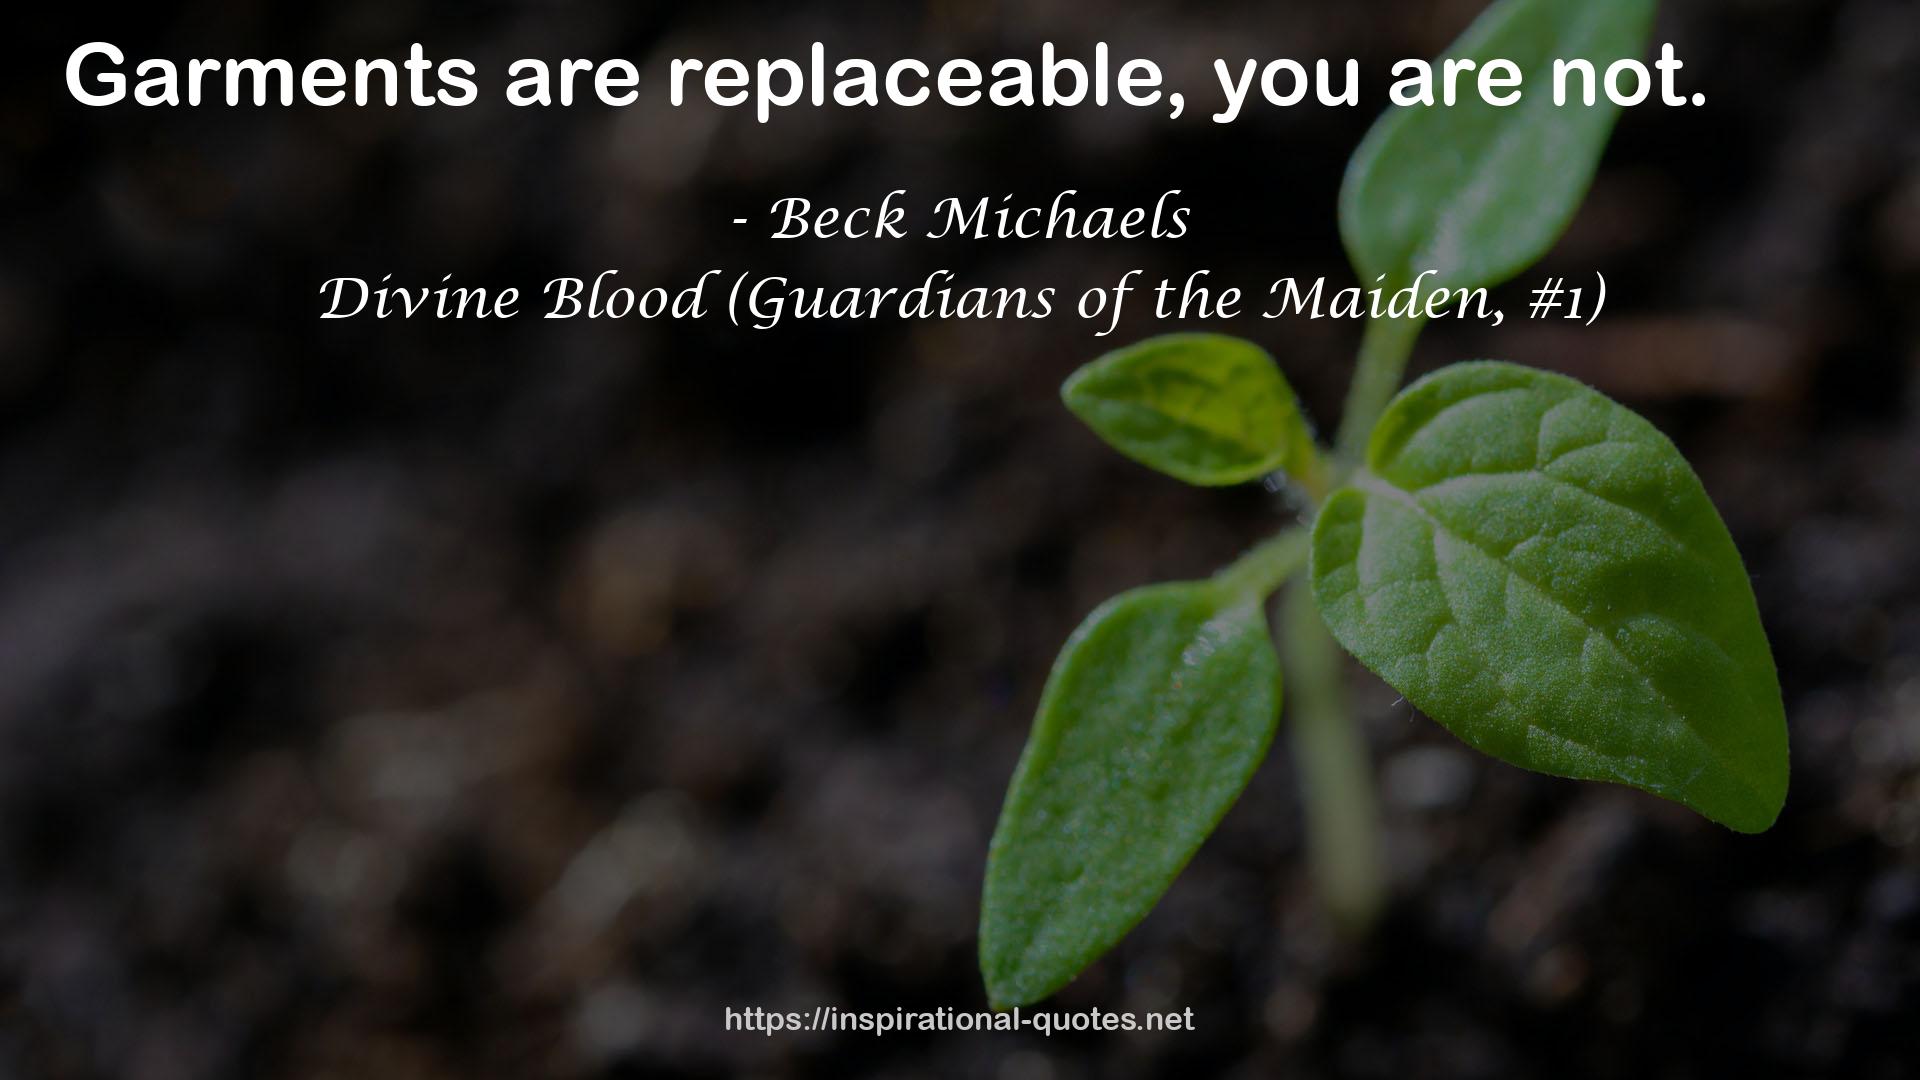 Divine Blood (Guardians of the Maiden, #1) QUOTES